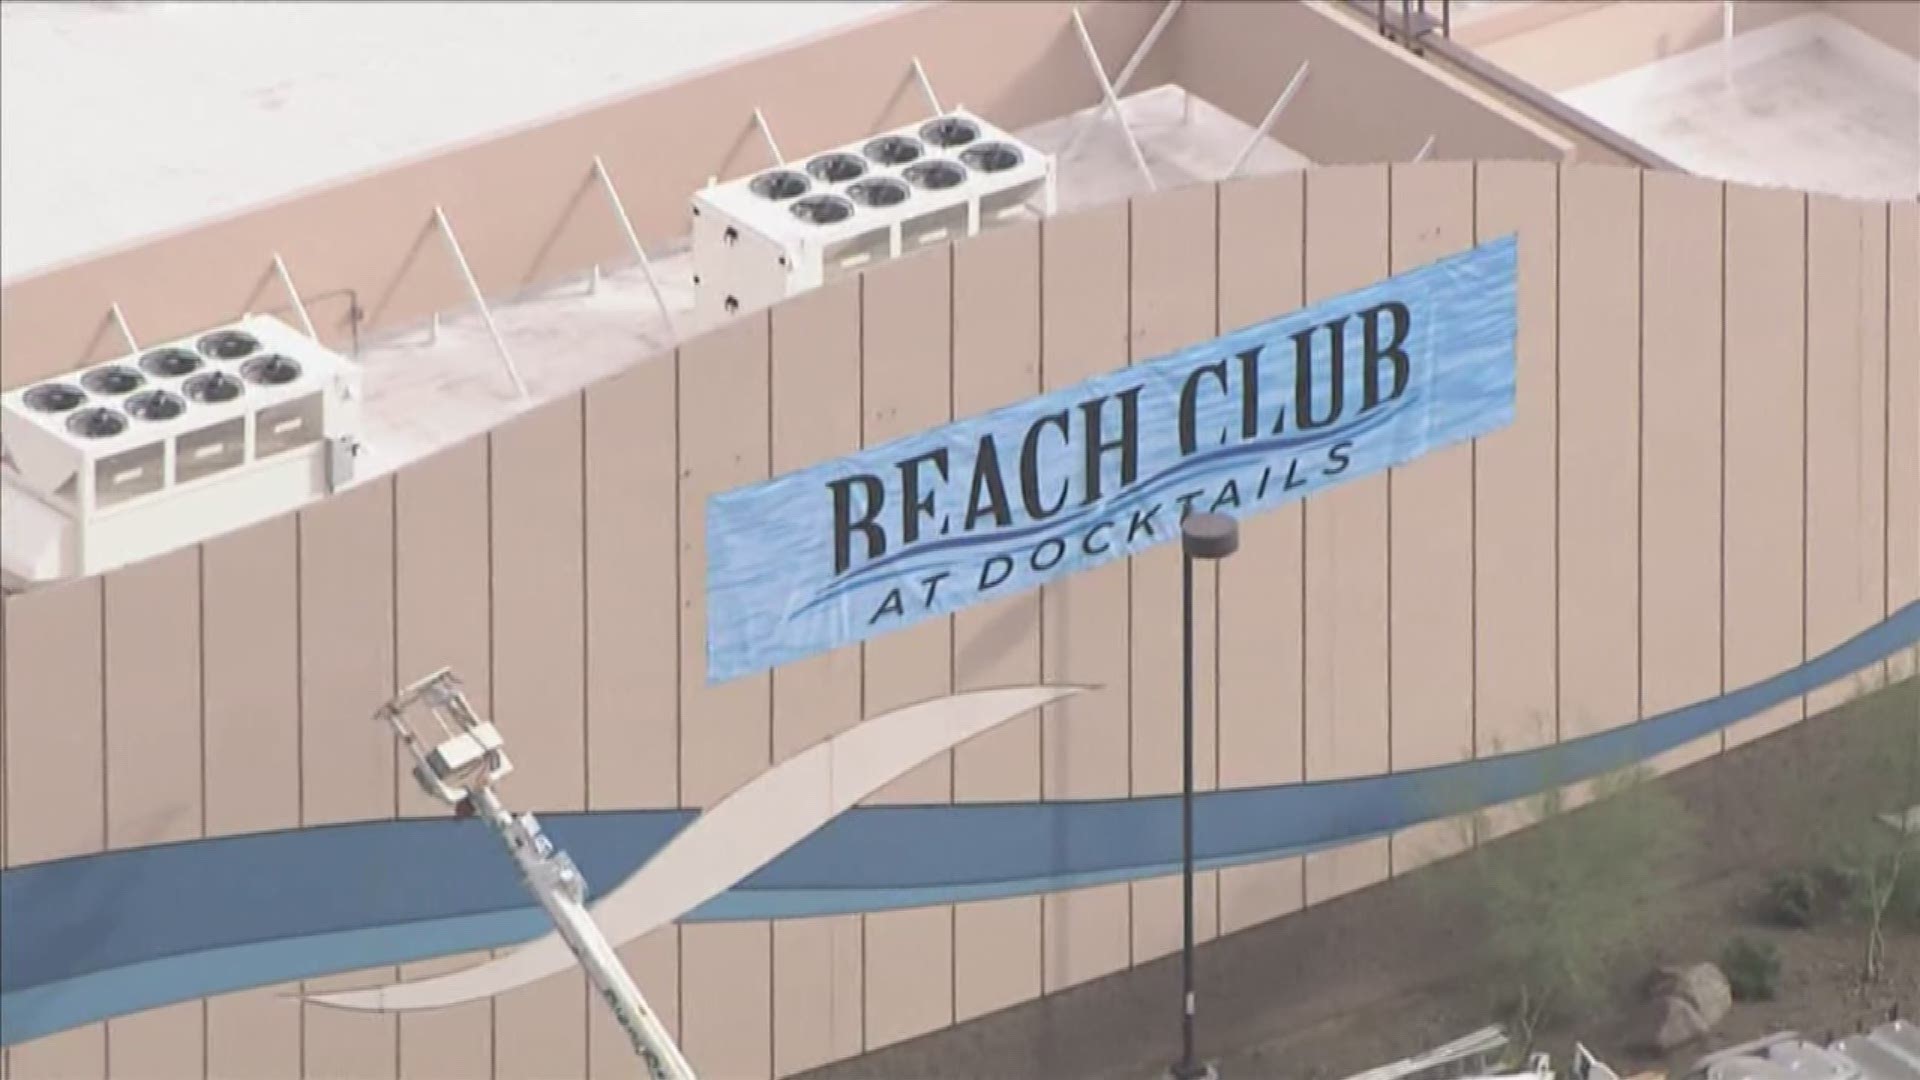 This afternoon the Dolphinaris sign has been taken down from the attraction and a new one has been put up in its place. The new sign reads Beach Club at Docktails. The attraction closed down last Friday after four dolphins died in less than two years at the facility.